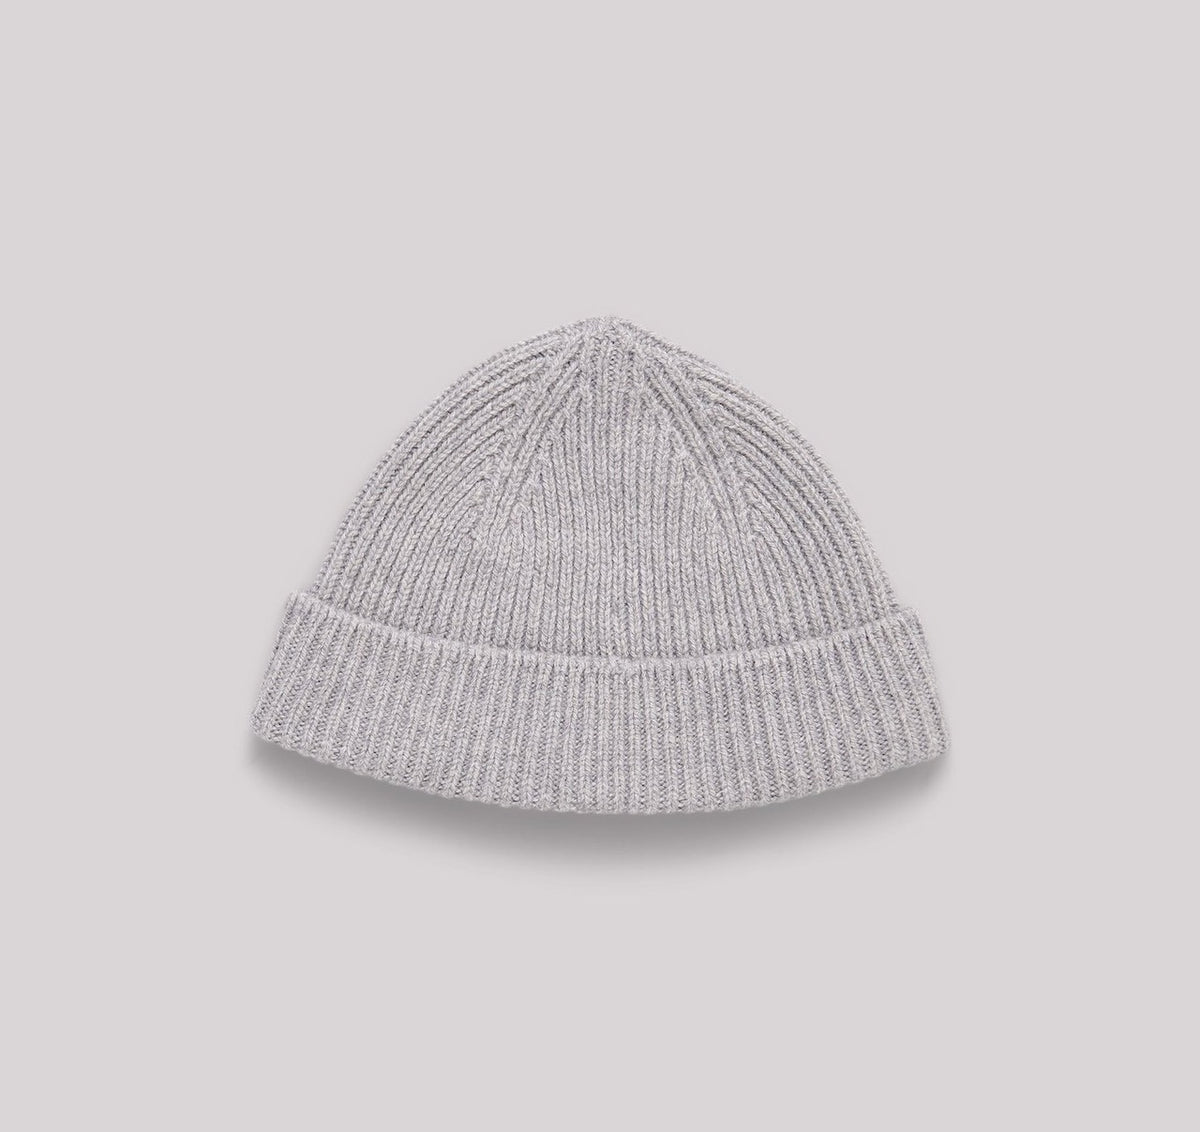 An Organic Basics Recycled Cashmere Beanie – Grey on a grey background.